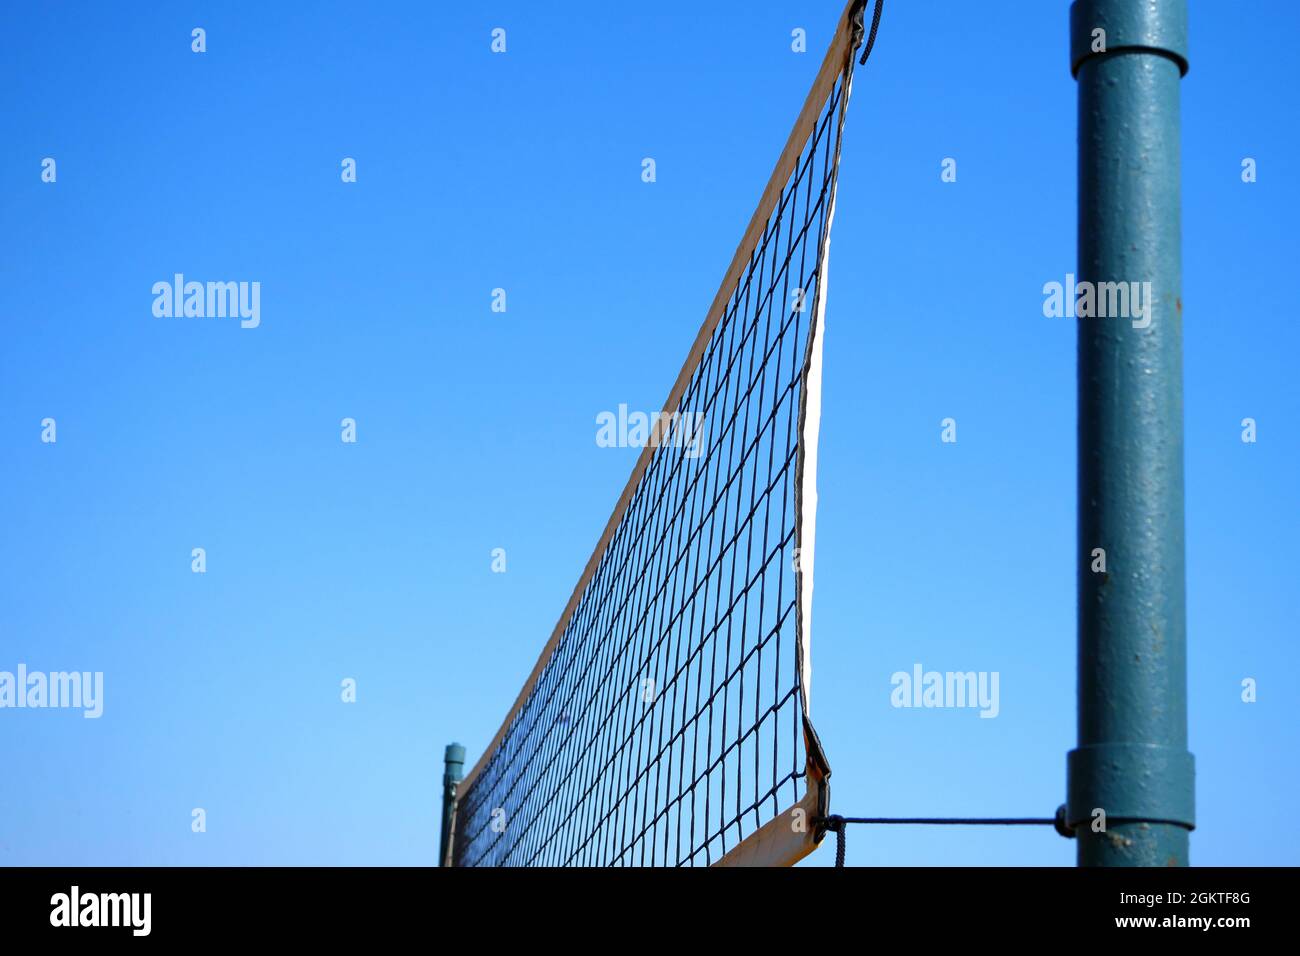 Volleyball net against blue sky. Beach volleyball equipment. Copy space. Stock Photo